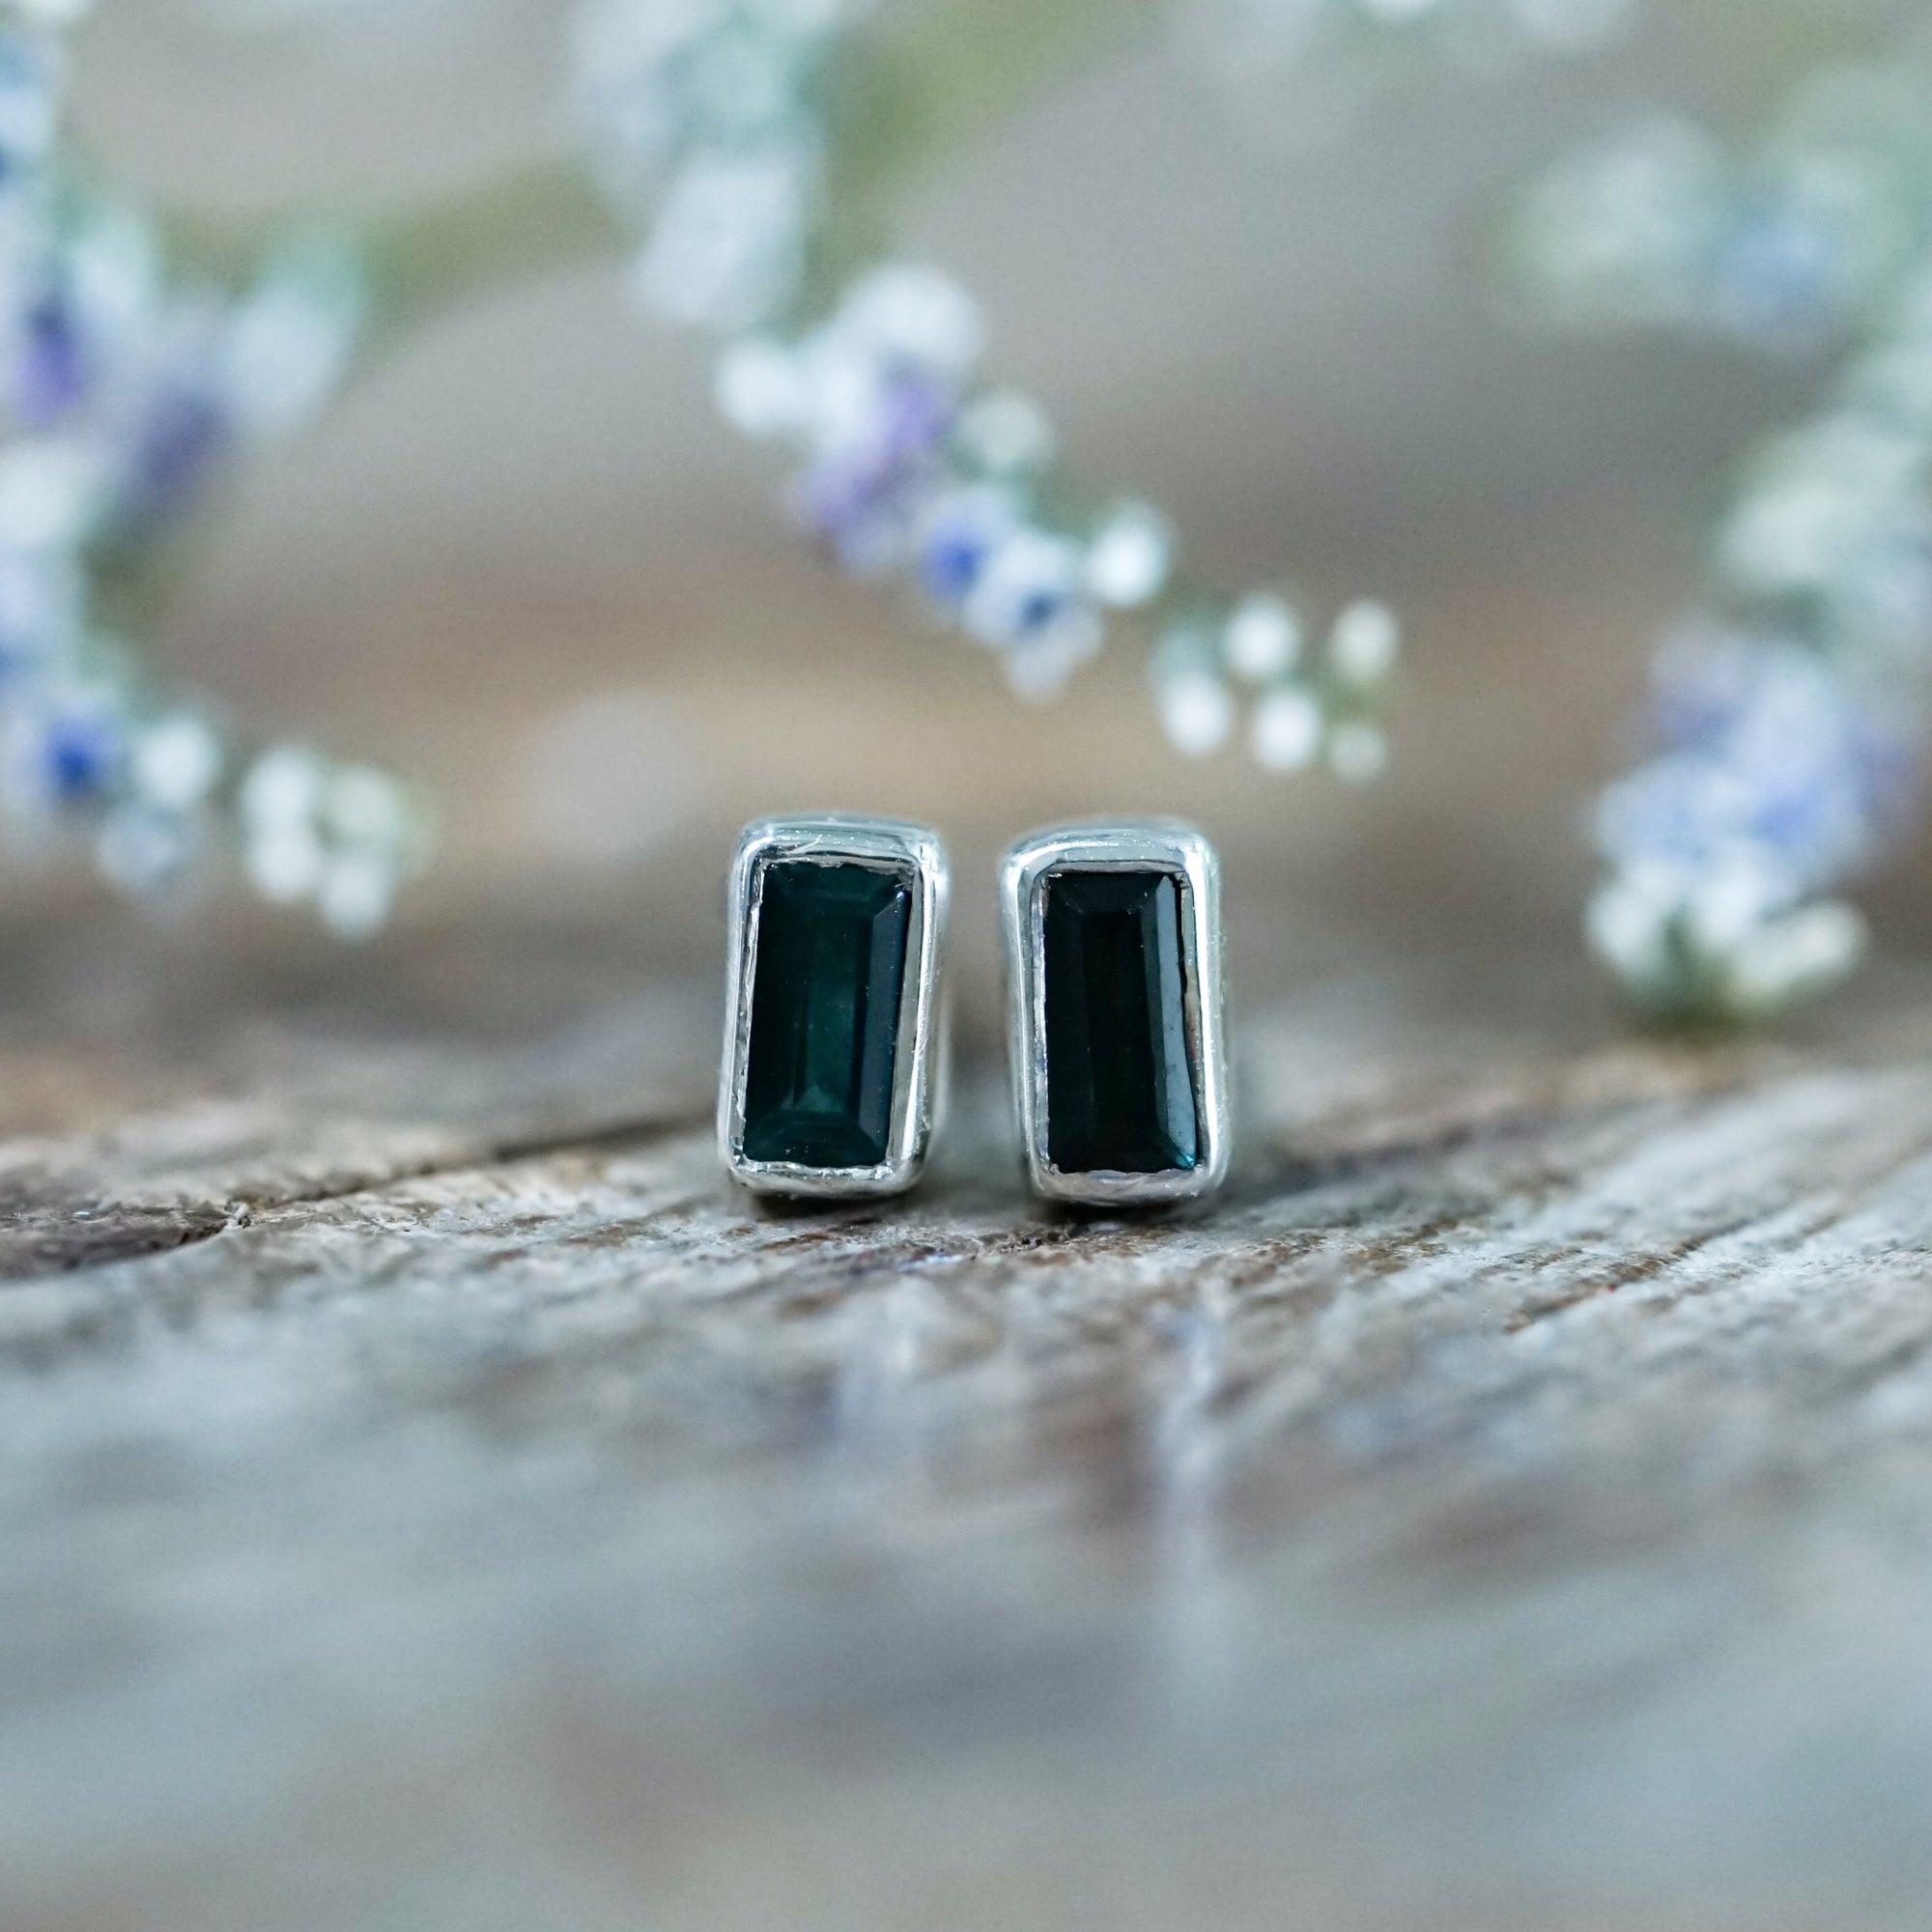 Teal Tourmaline Earrings - Gardens of the Sun | Ethical Jewelry